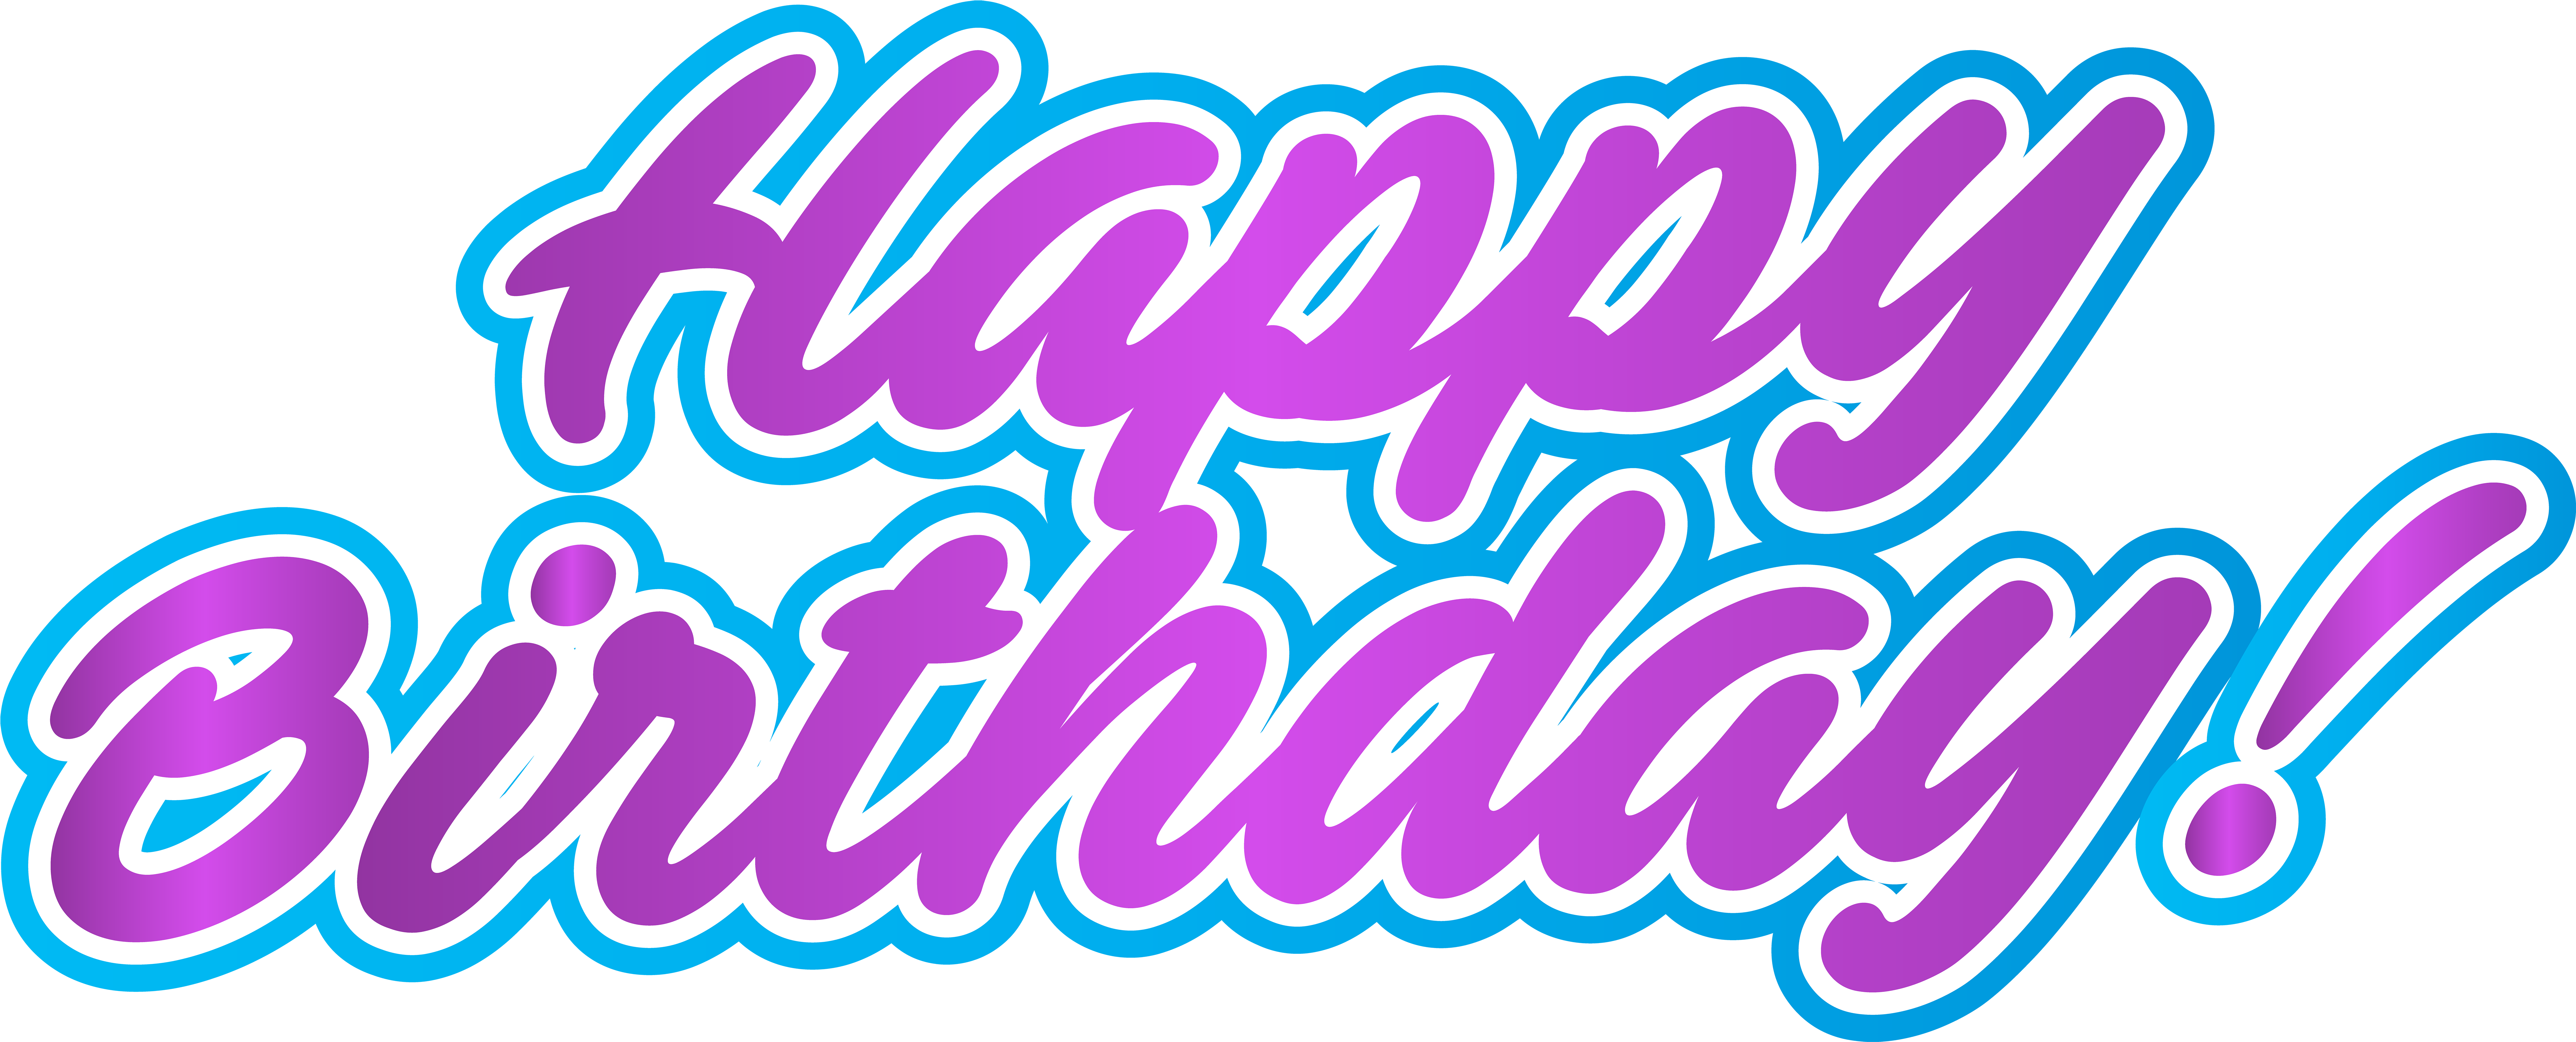 Free Birthday Background Png Download Free Birthday Background Png Png